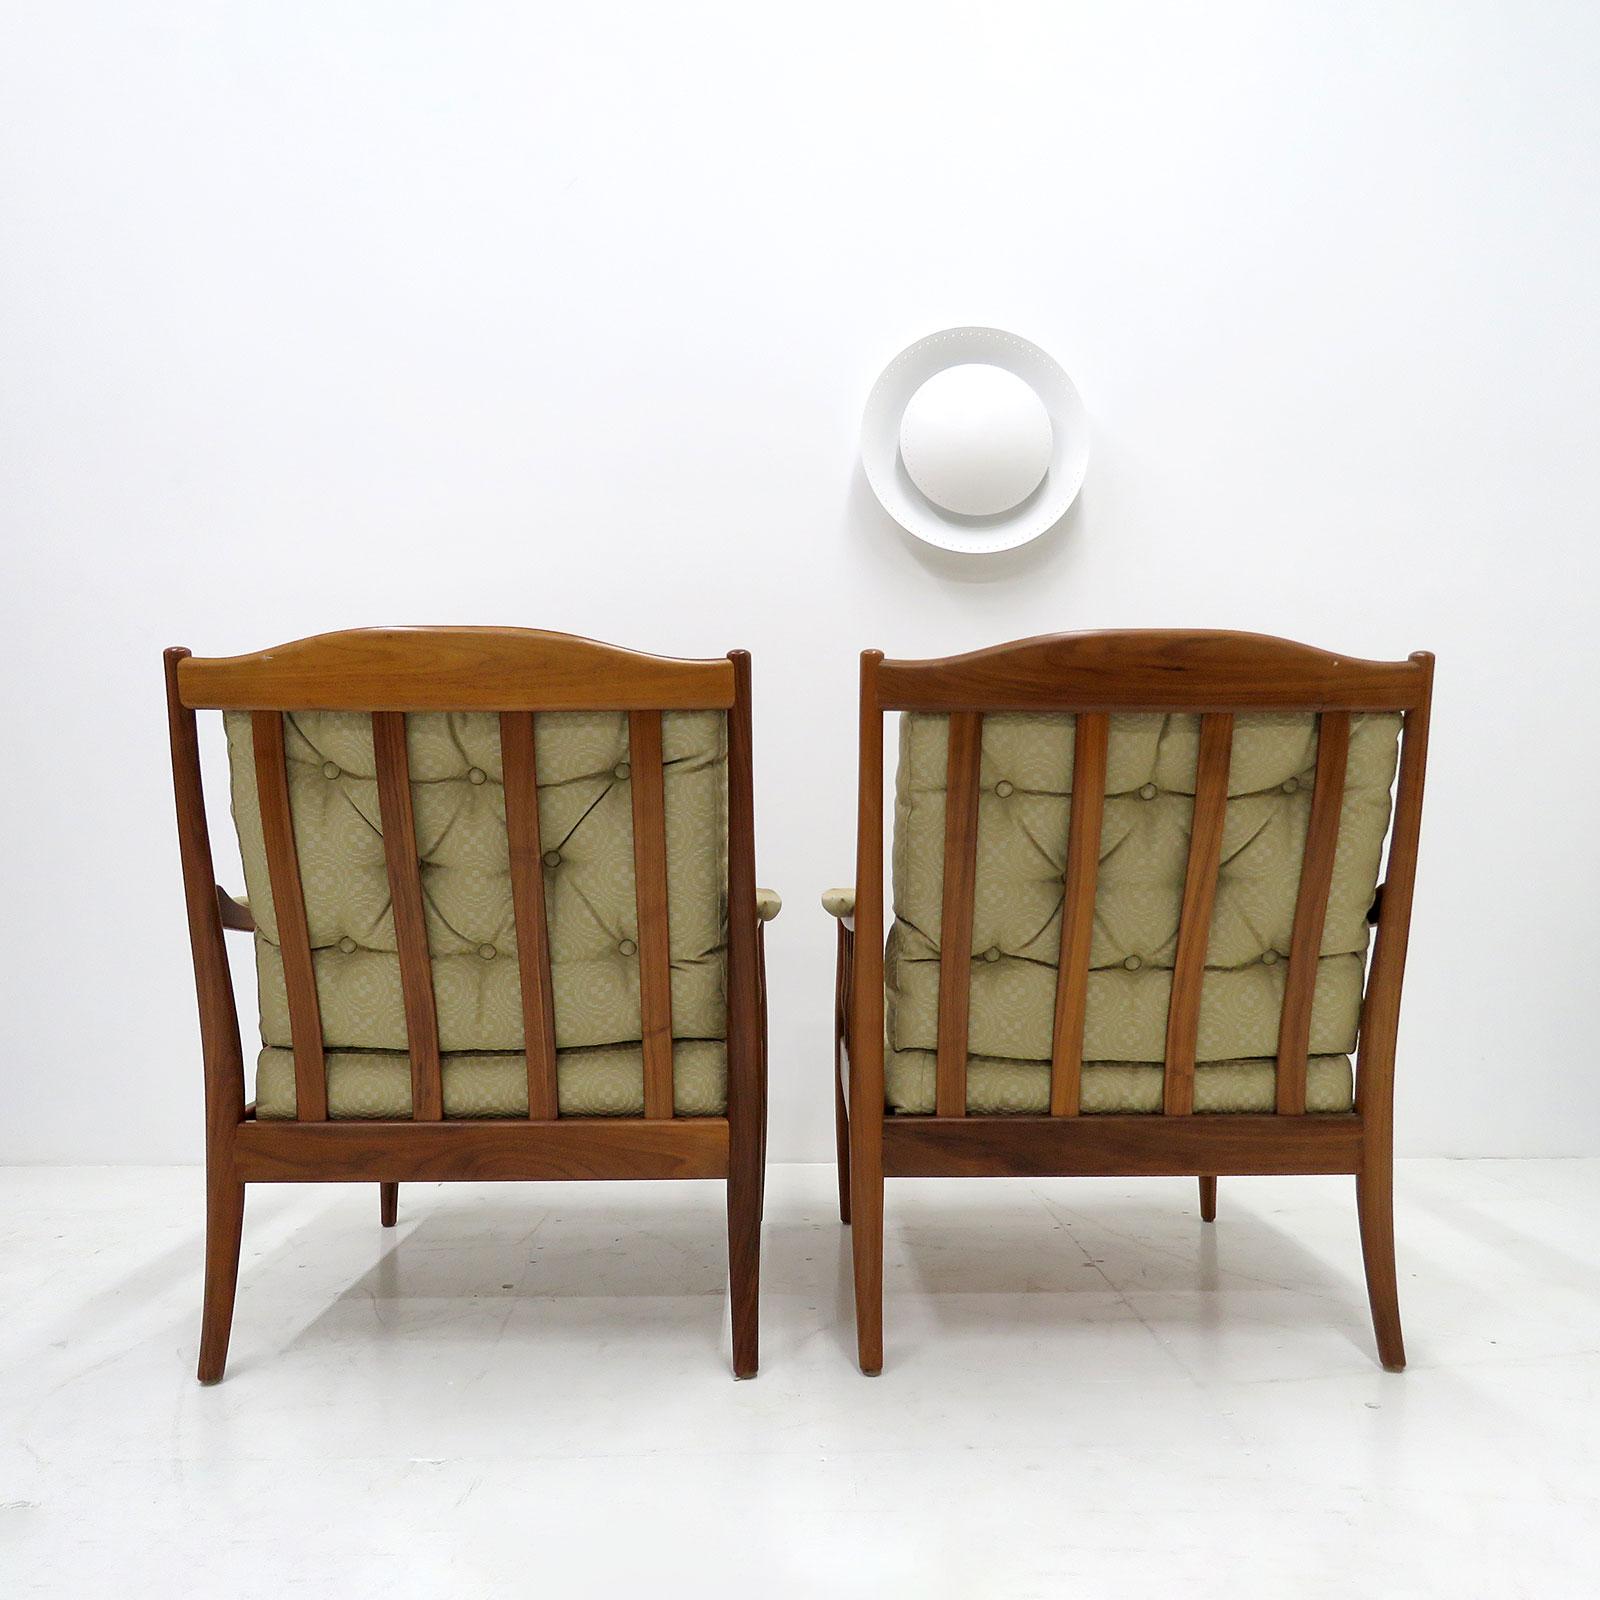 Swedish Armchairs by Kerstin Hörlin-Holmquist for OPE Möbler, 1960 For Sale